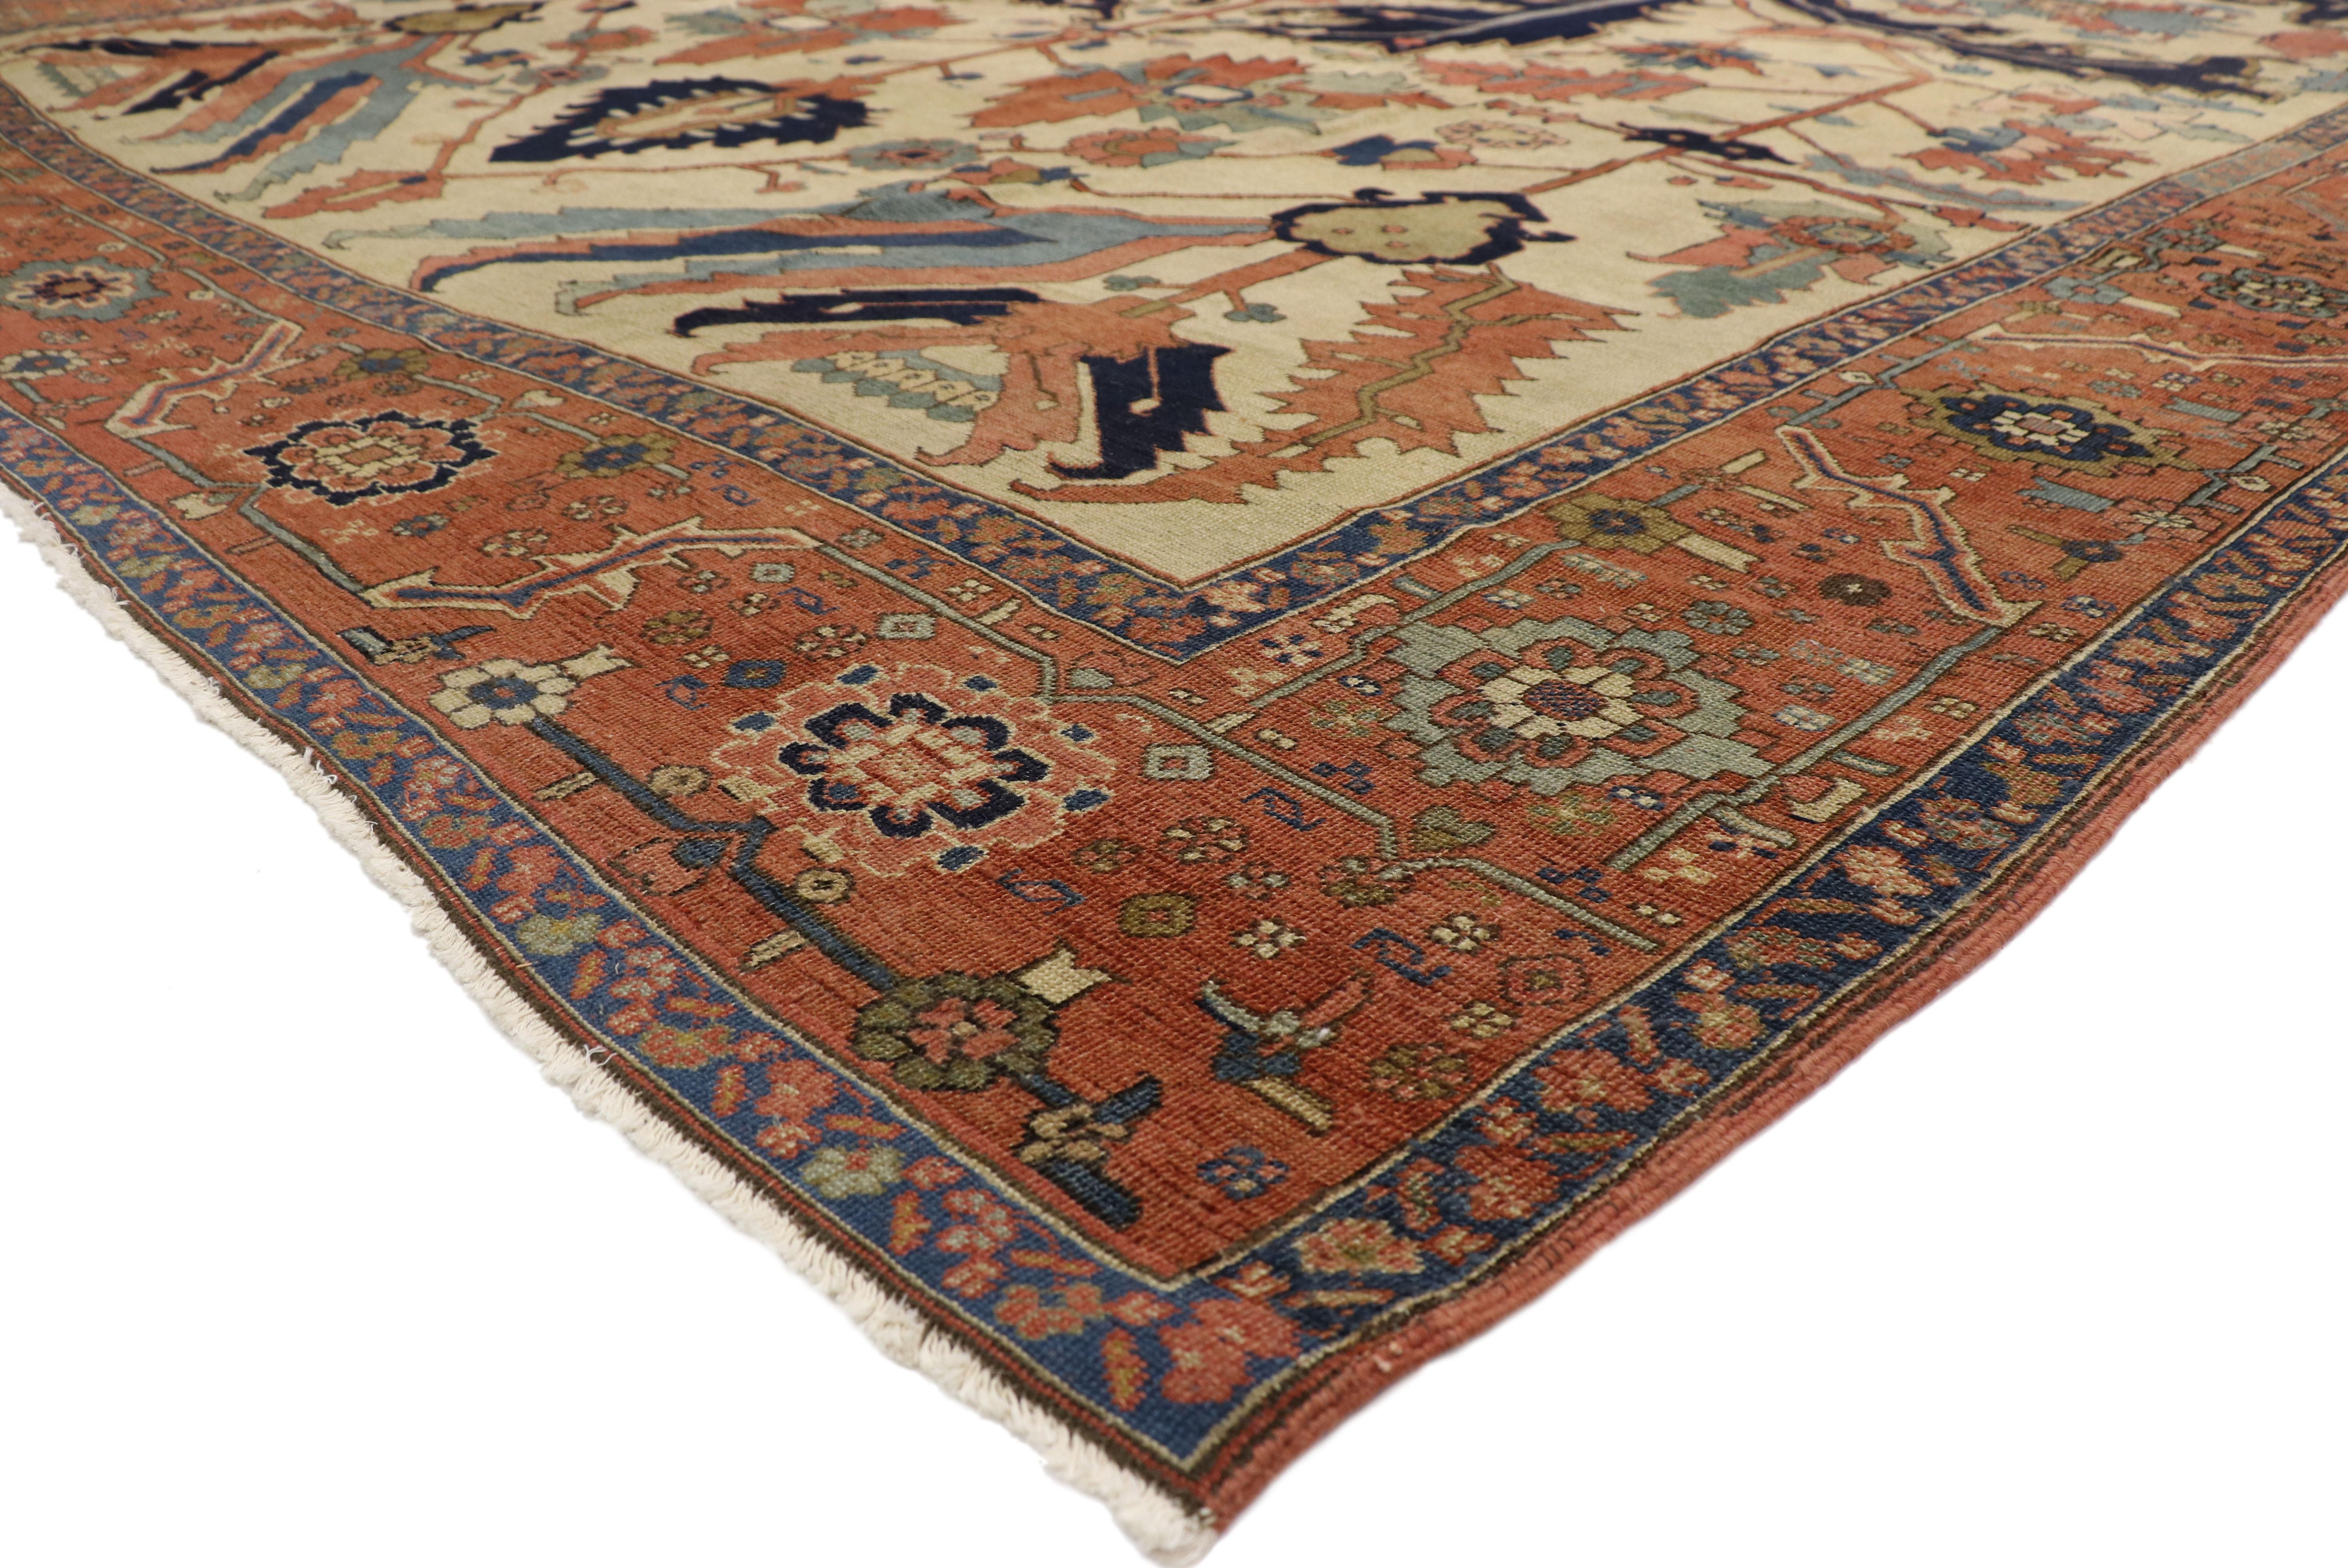 76927 antique Persian all-over Serapi rug with English Tudor style. With a warm, neutral color palette, striking appeal, and architectural design elements, this hand knotted wool Tudor style antique Persian Serapi rug can beautifully blend